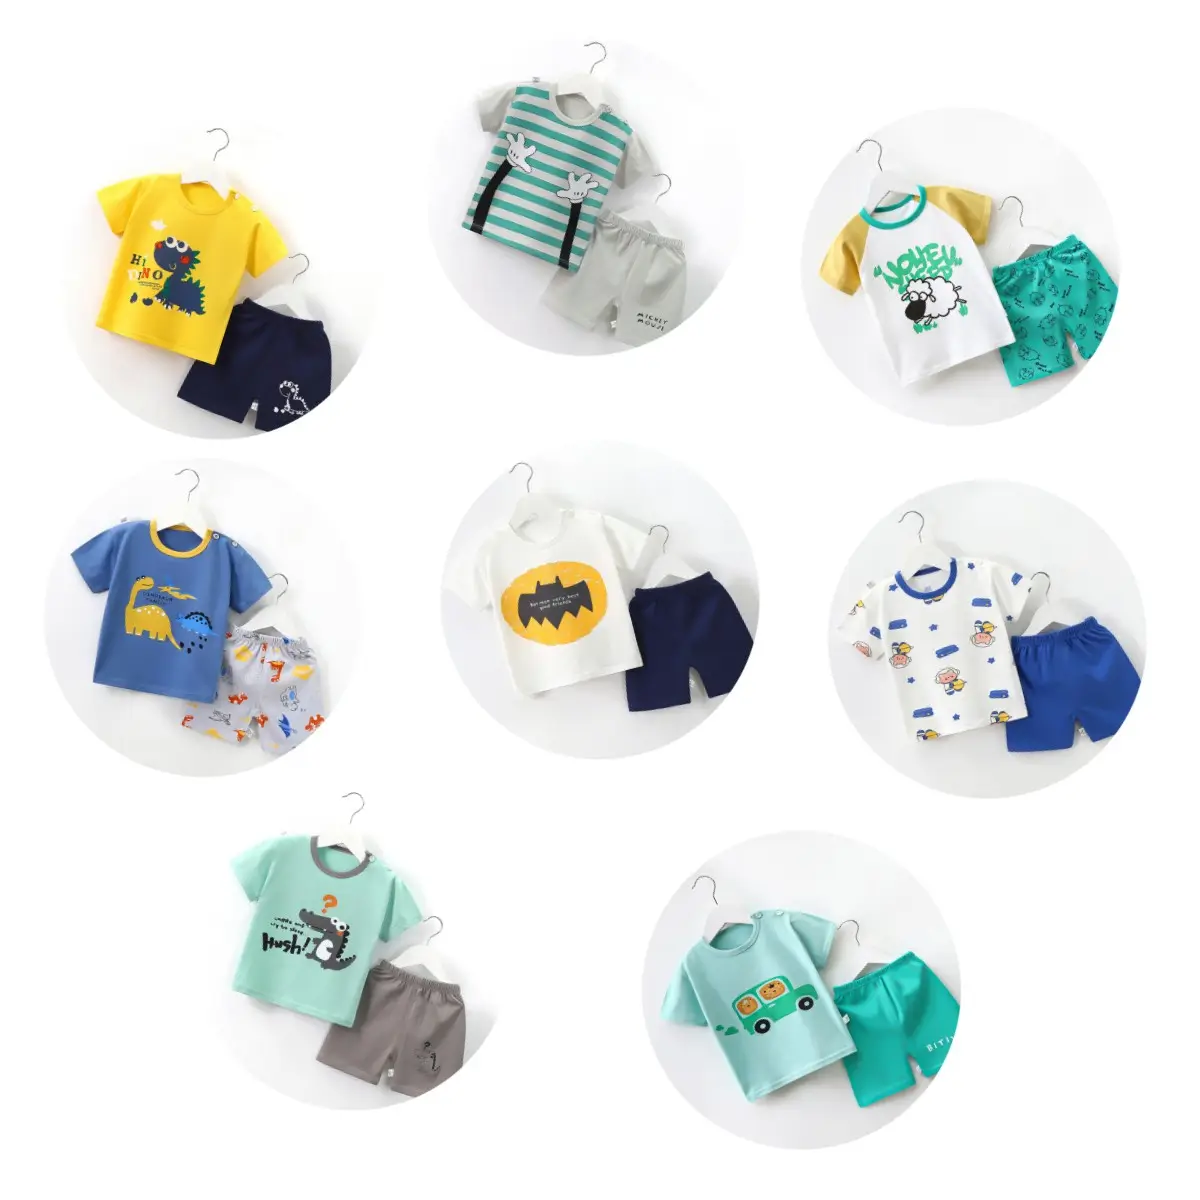 RTS New Stylish baby clothes for boy Organic Cotton set suit for kids Summer boys outfits shorts